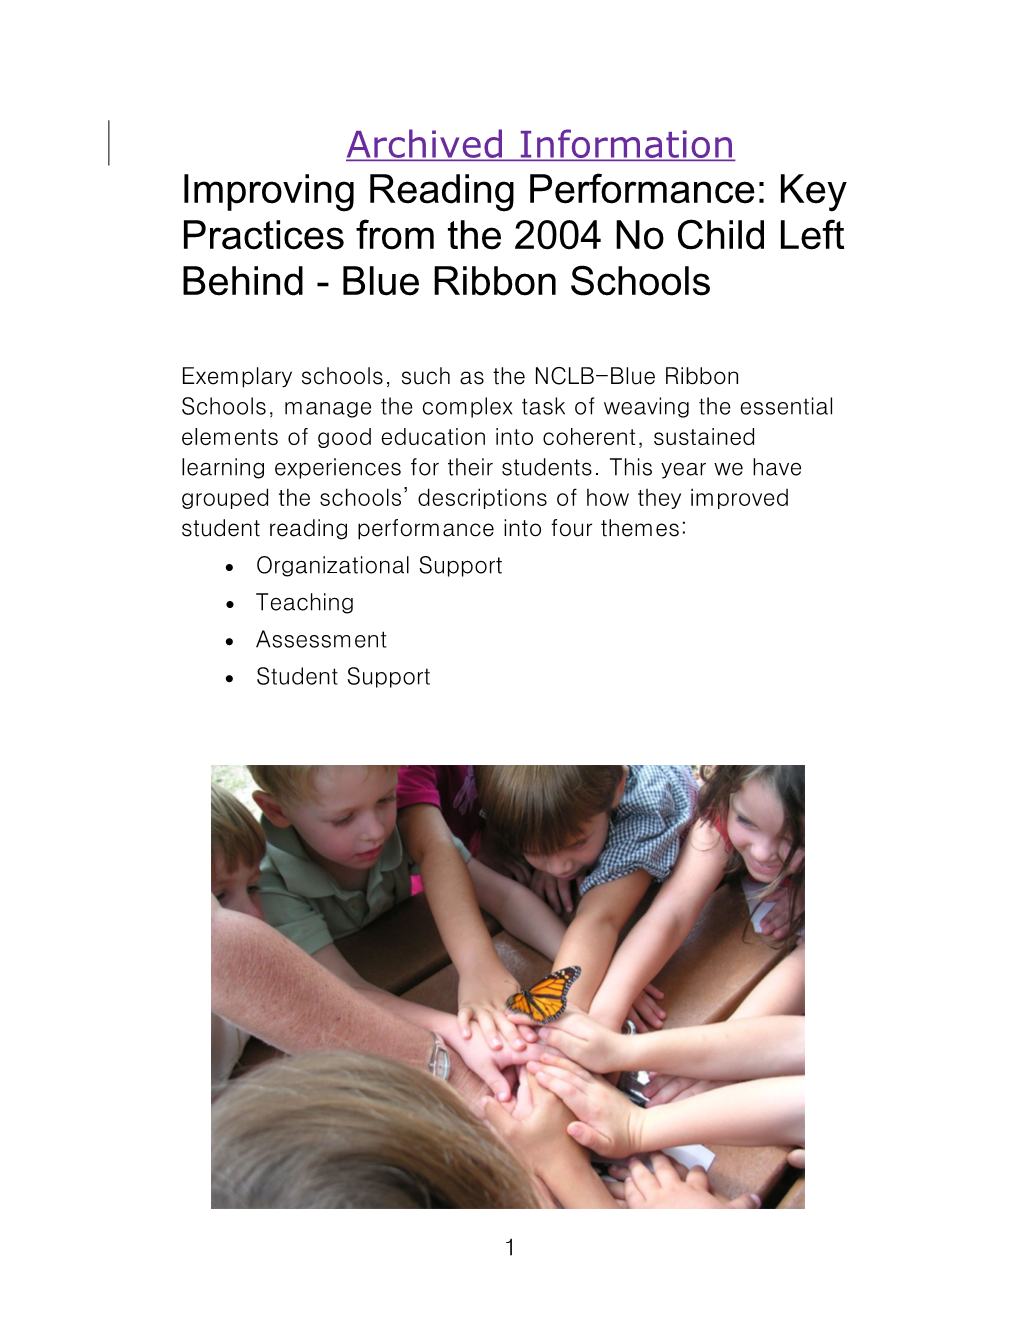 Archived: Improving Reading Performance, 2004 (Msword)